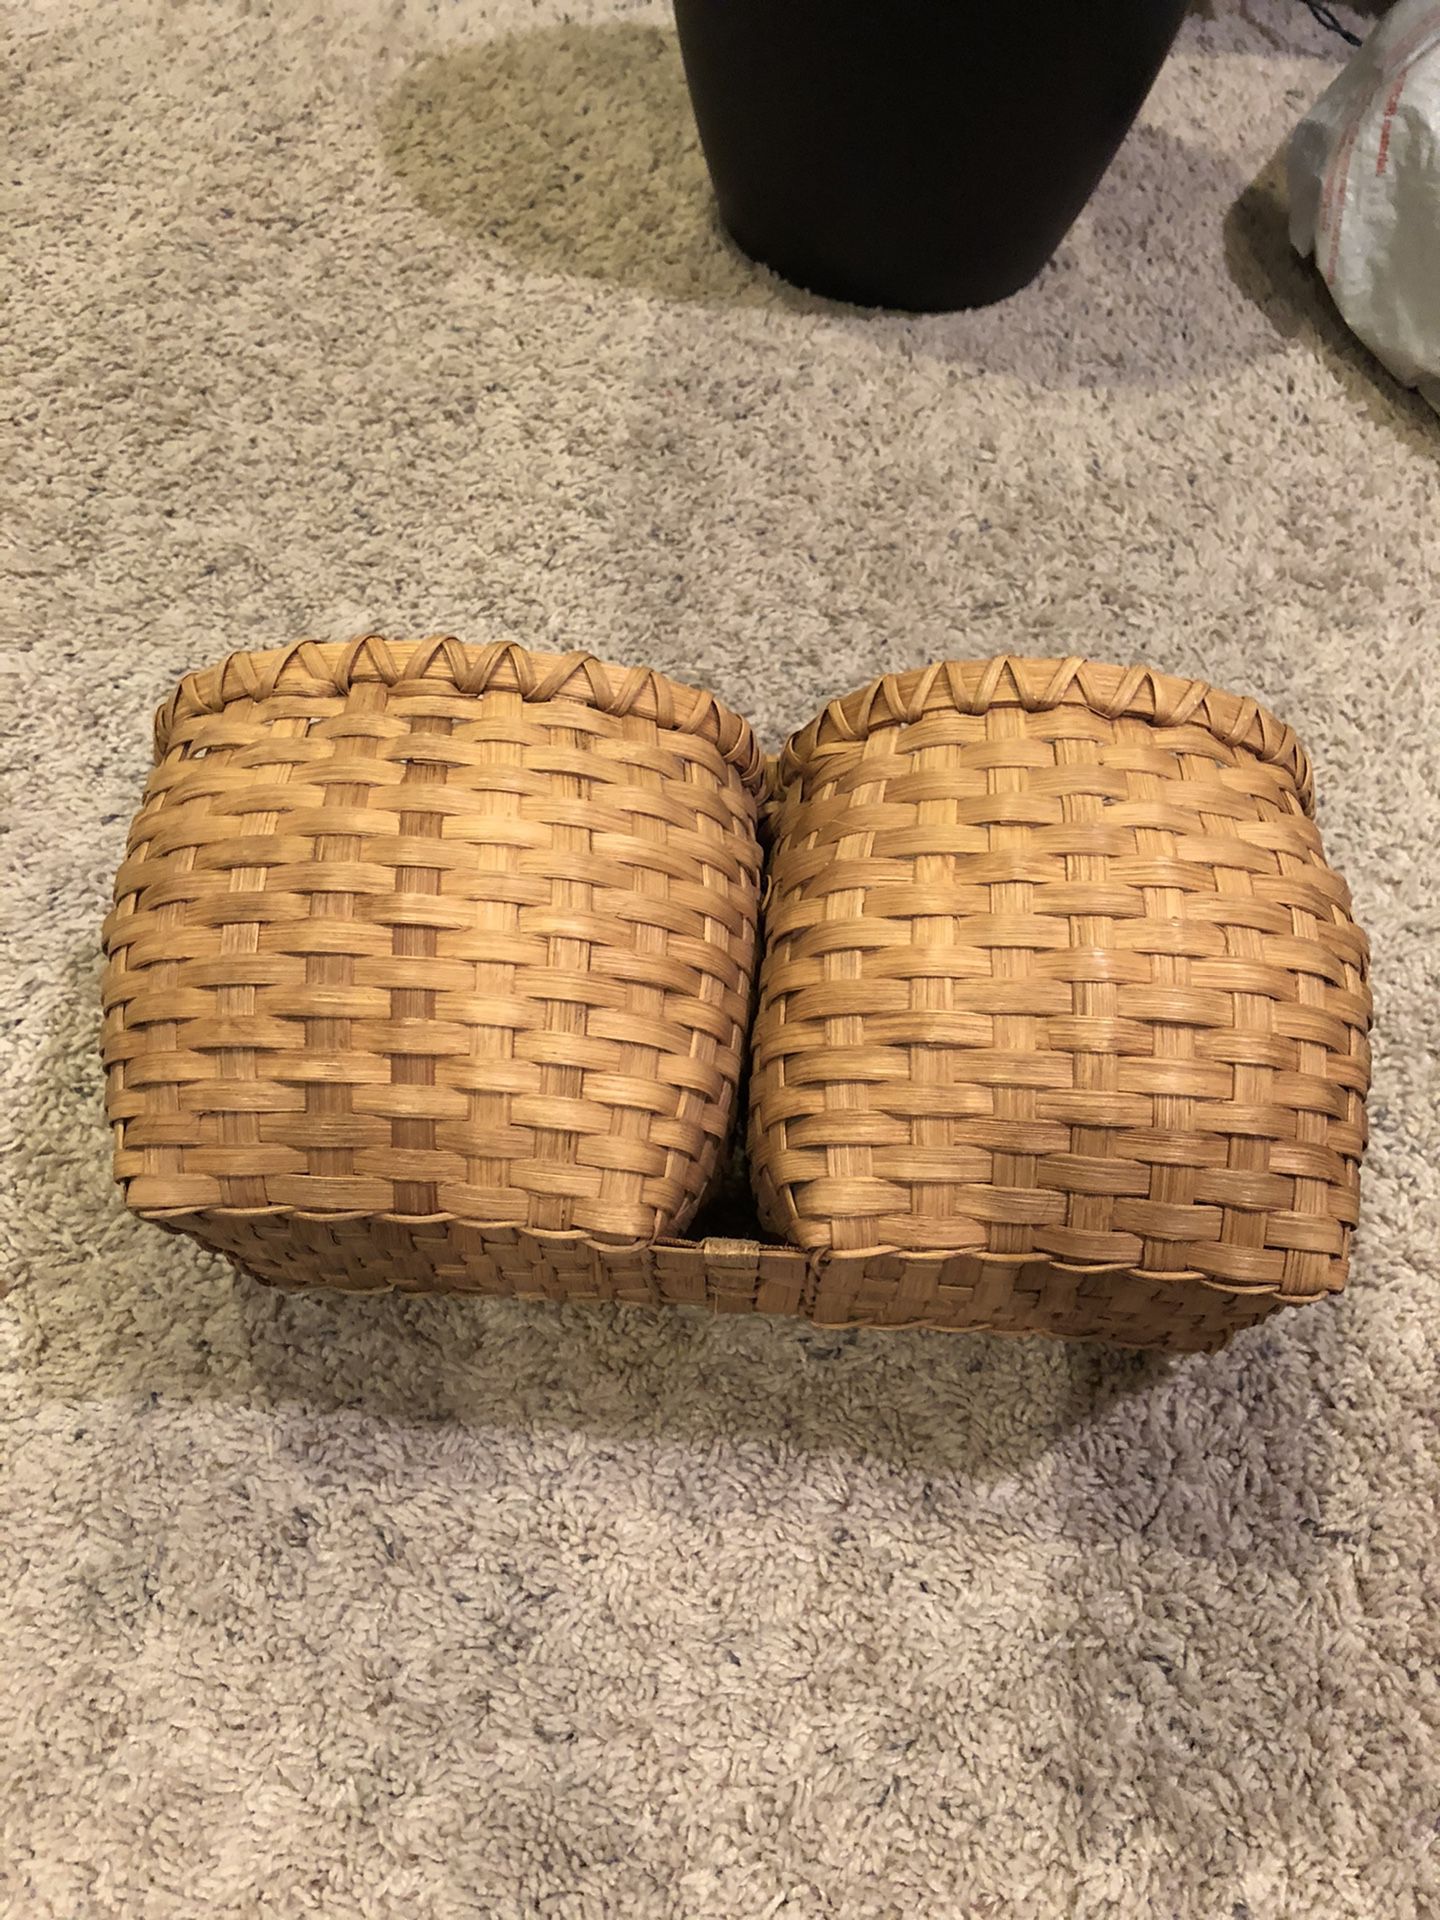 Woven Wooden Baskets (Attached Together)